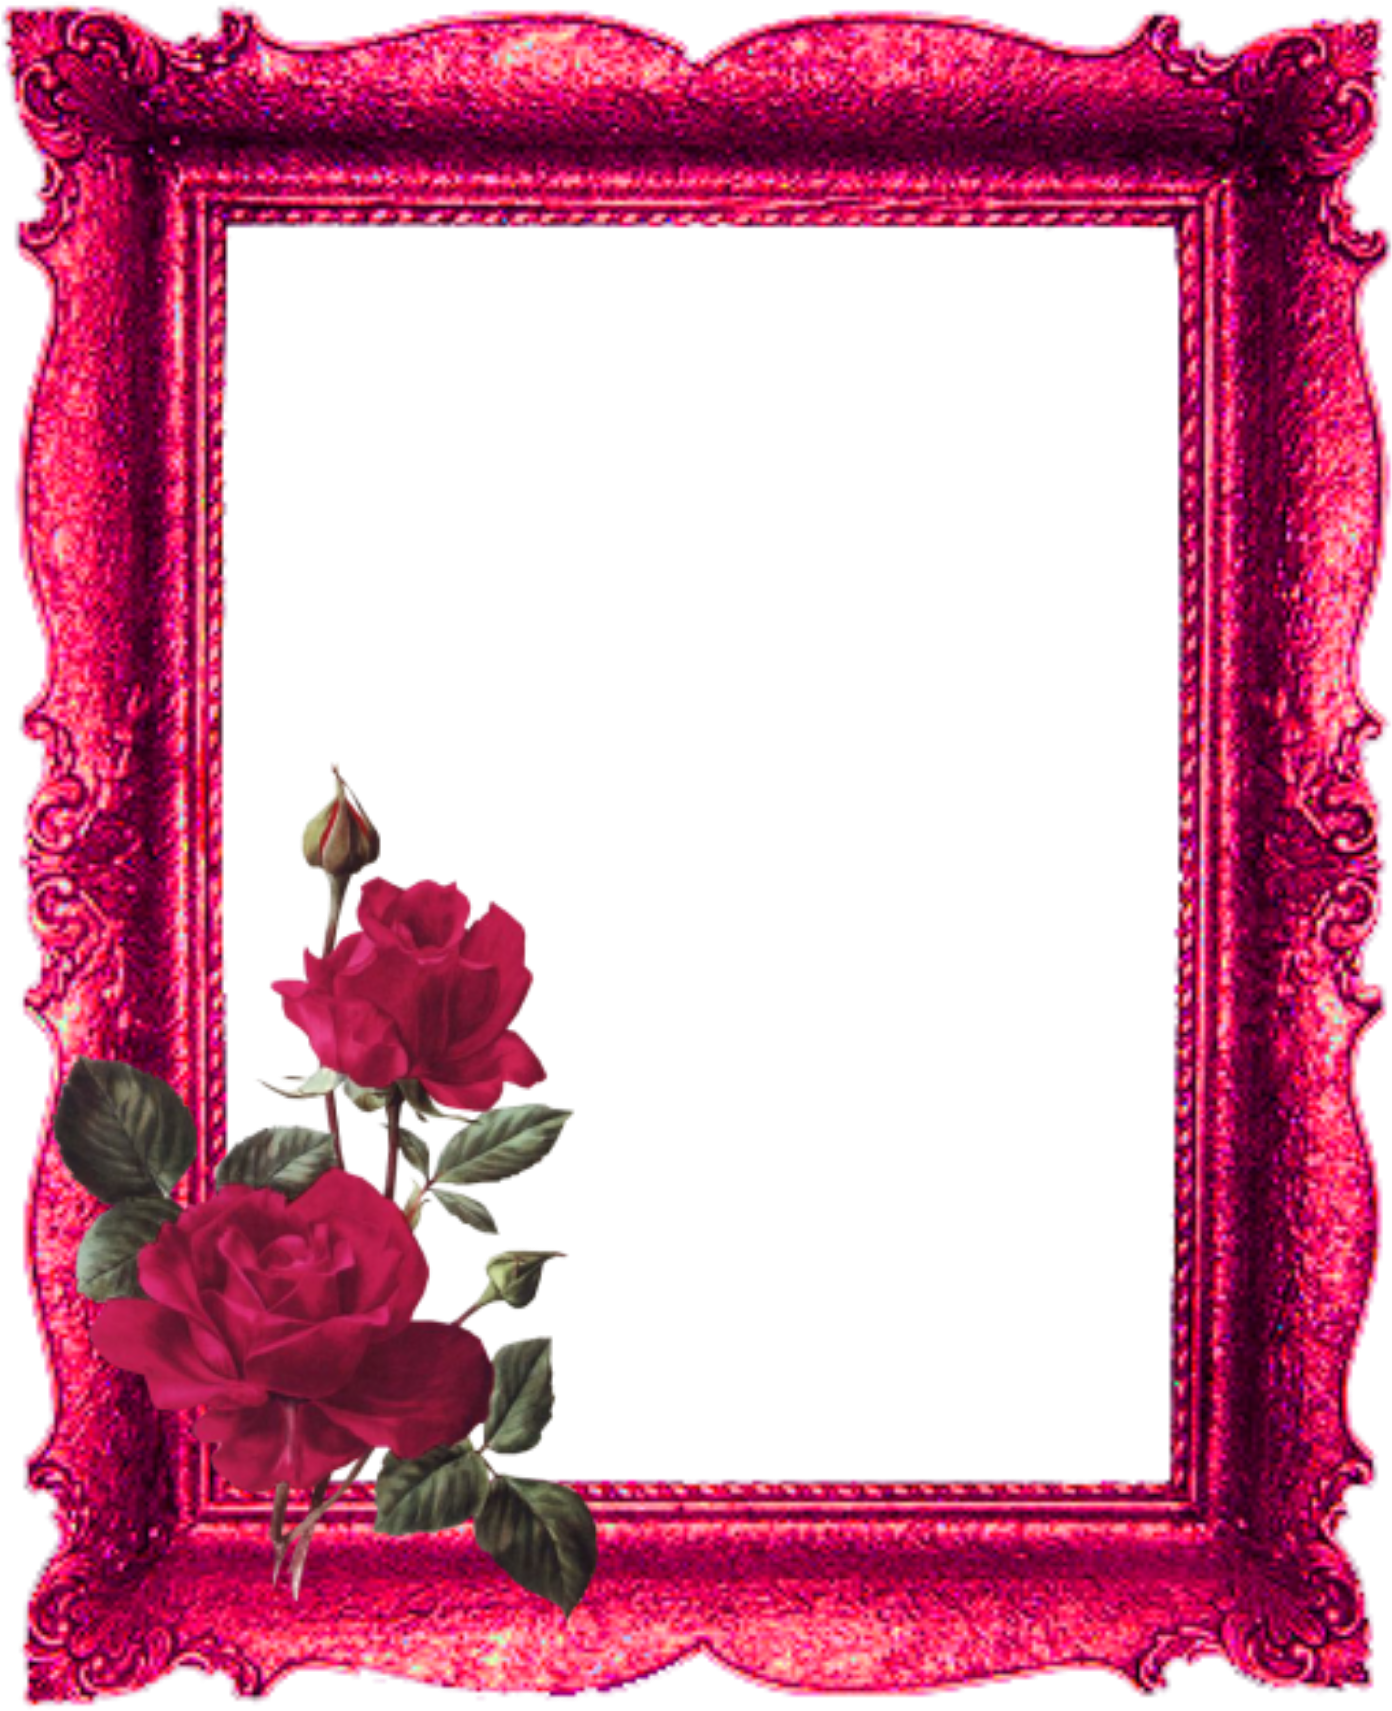 Red Rose Decorated Frame